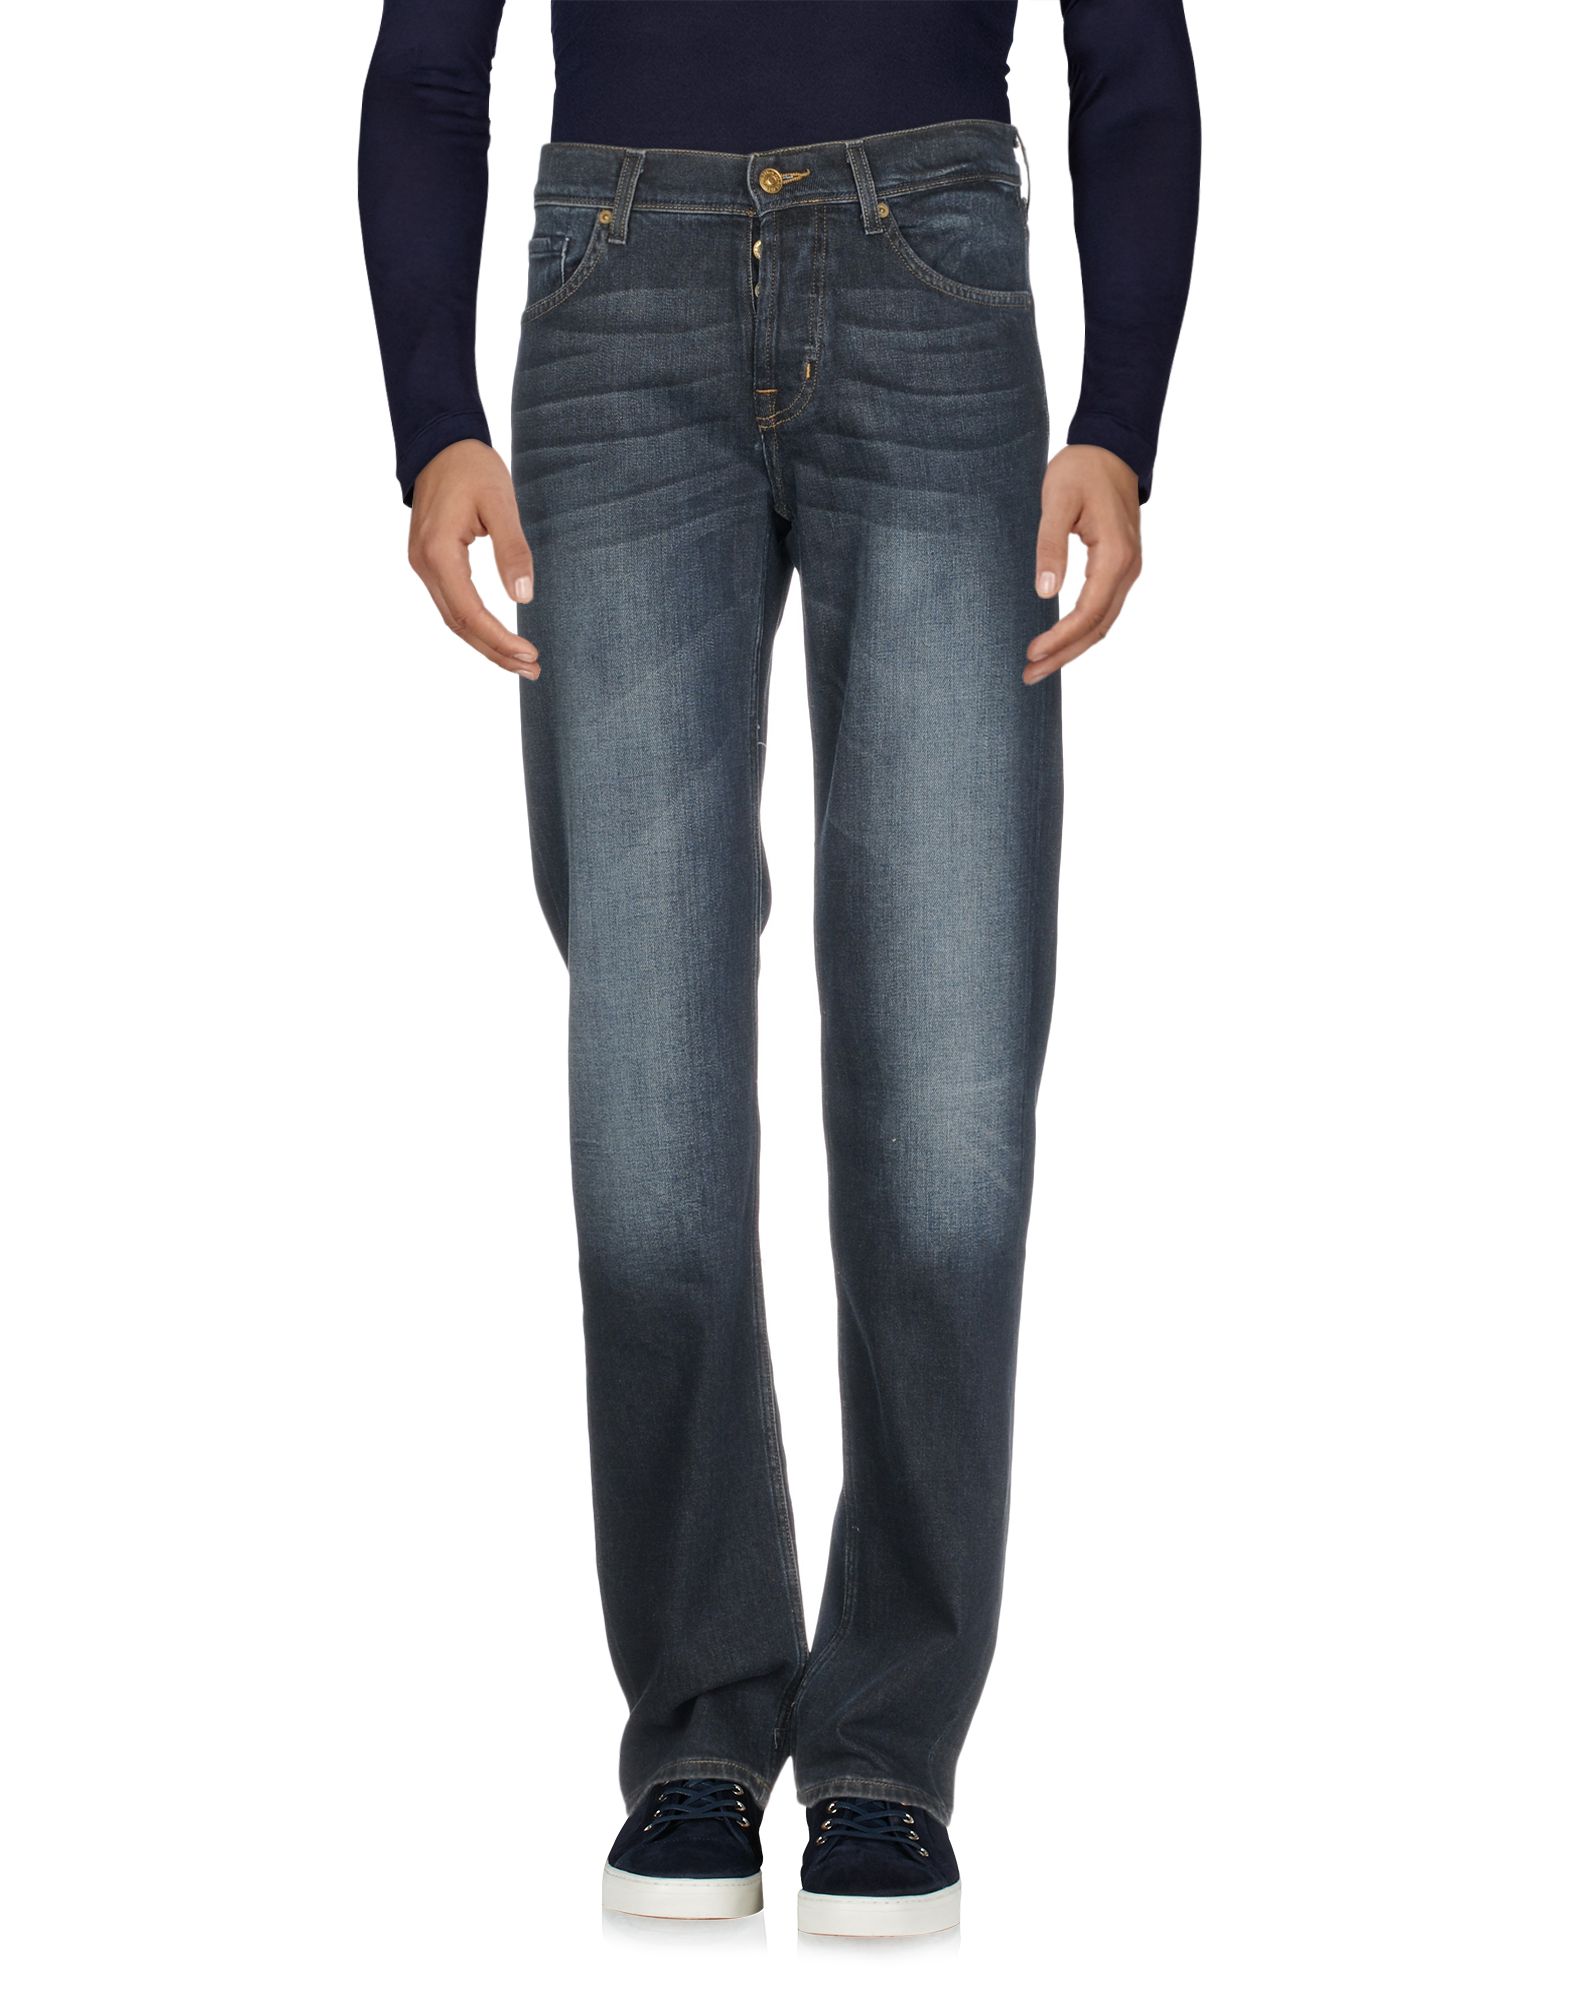 7 FOR ALL MANKIND Denim trousers,42674939GQ 4